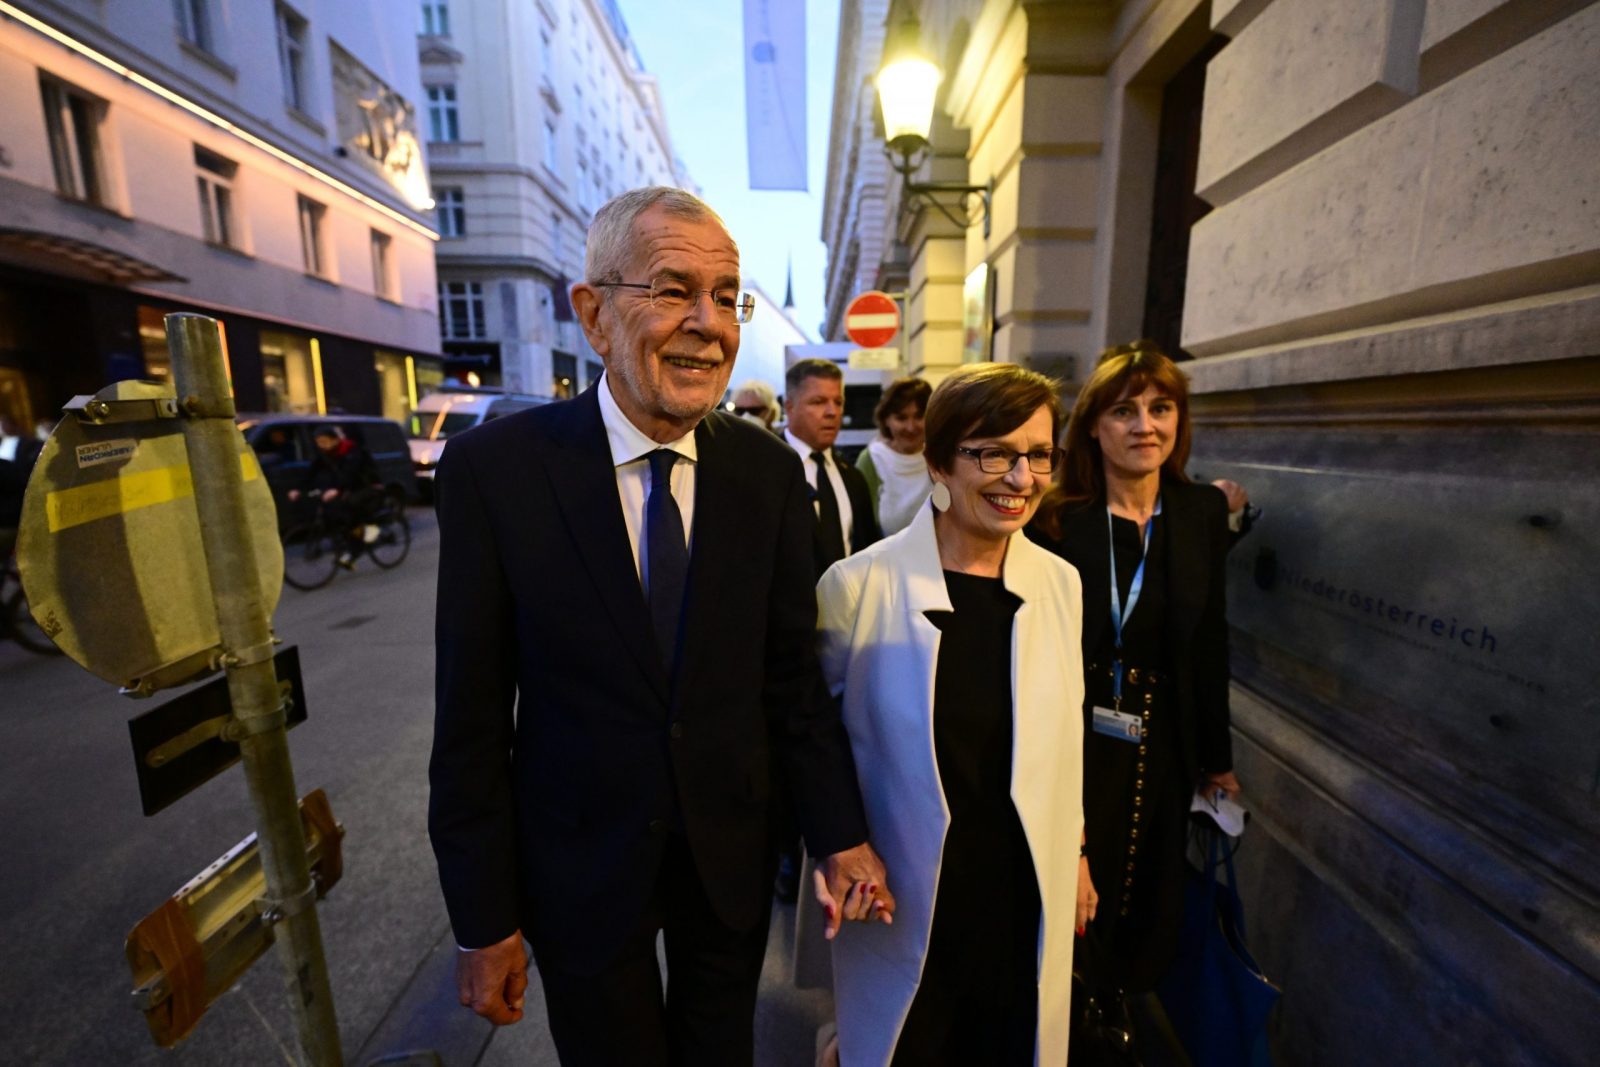 epa10233194 Austrian President Alexander Van der Bellen (L) and his wife Doris Schmidauer (R) arrive at the Media Center at the Palais Niederoesterreich during the Austrian presidential elections, in Vienna, Austria, 09 October 2022. Over six million Austrians are casting their votes to elect the next Austrian president. If no candidate achieves the outright majority, a run-off election will take place on 06 November 2022.  EPA/CHRISTIAN BRUNA